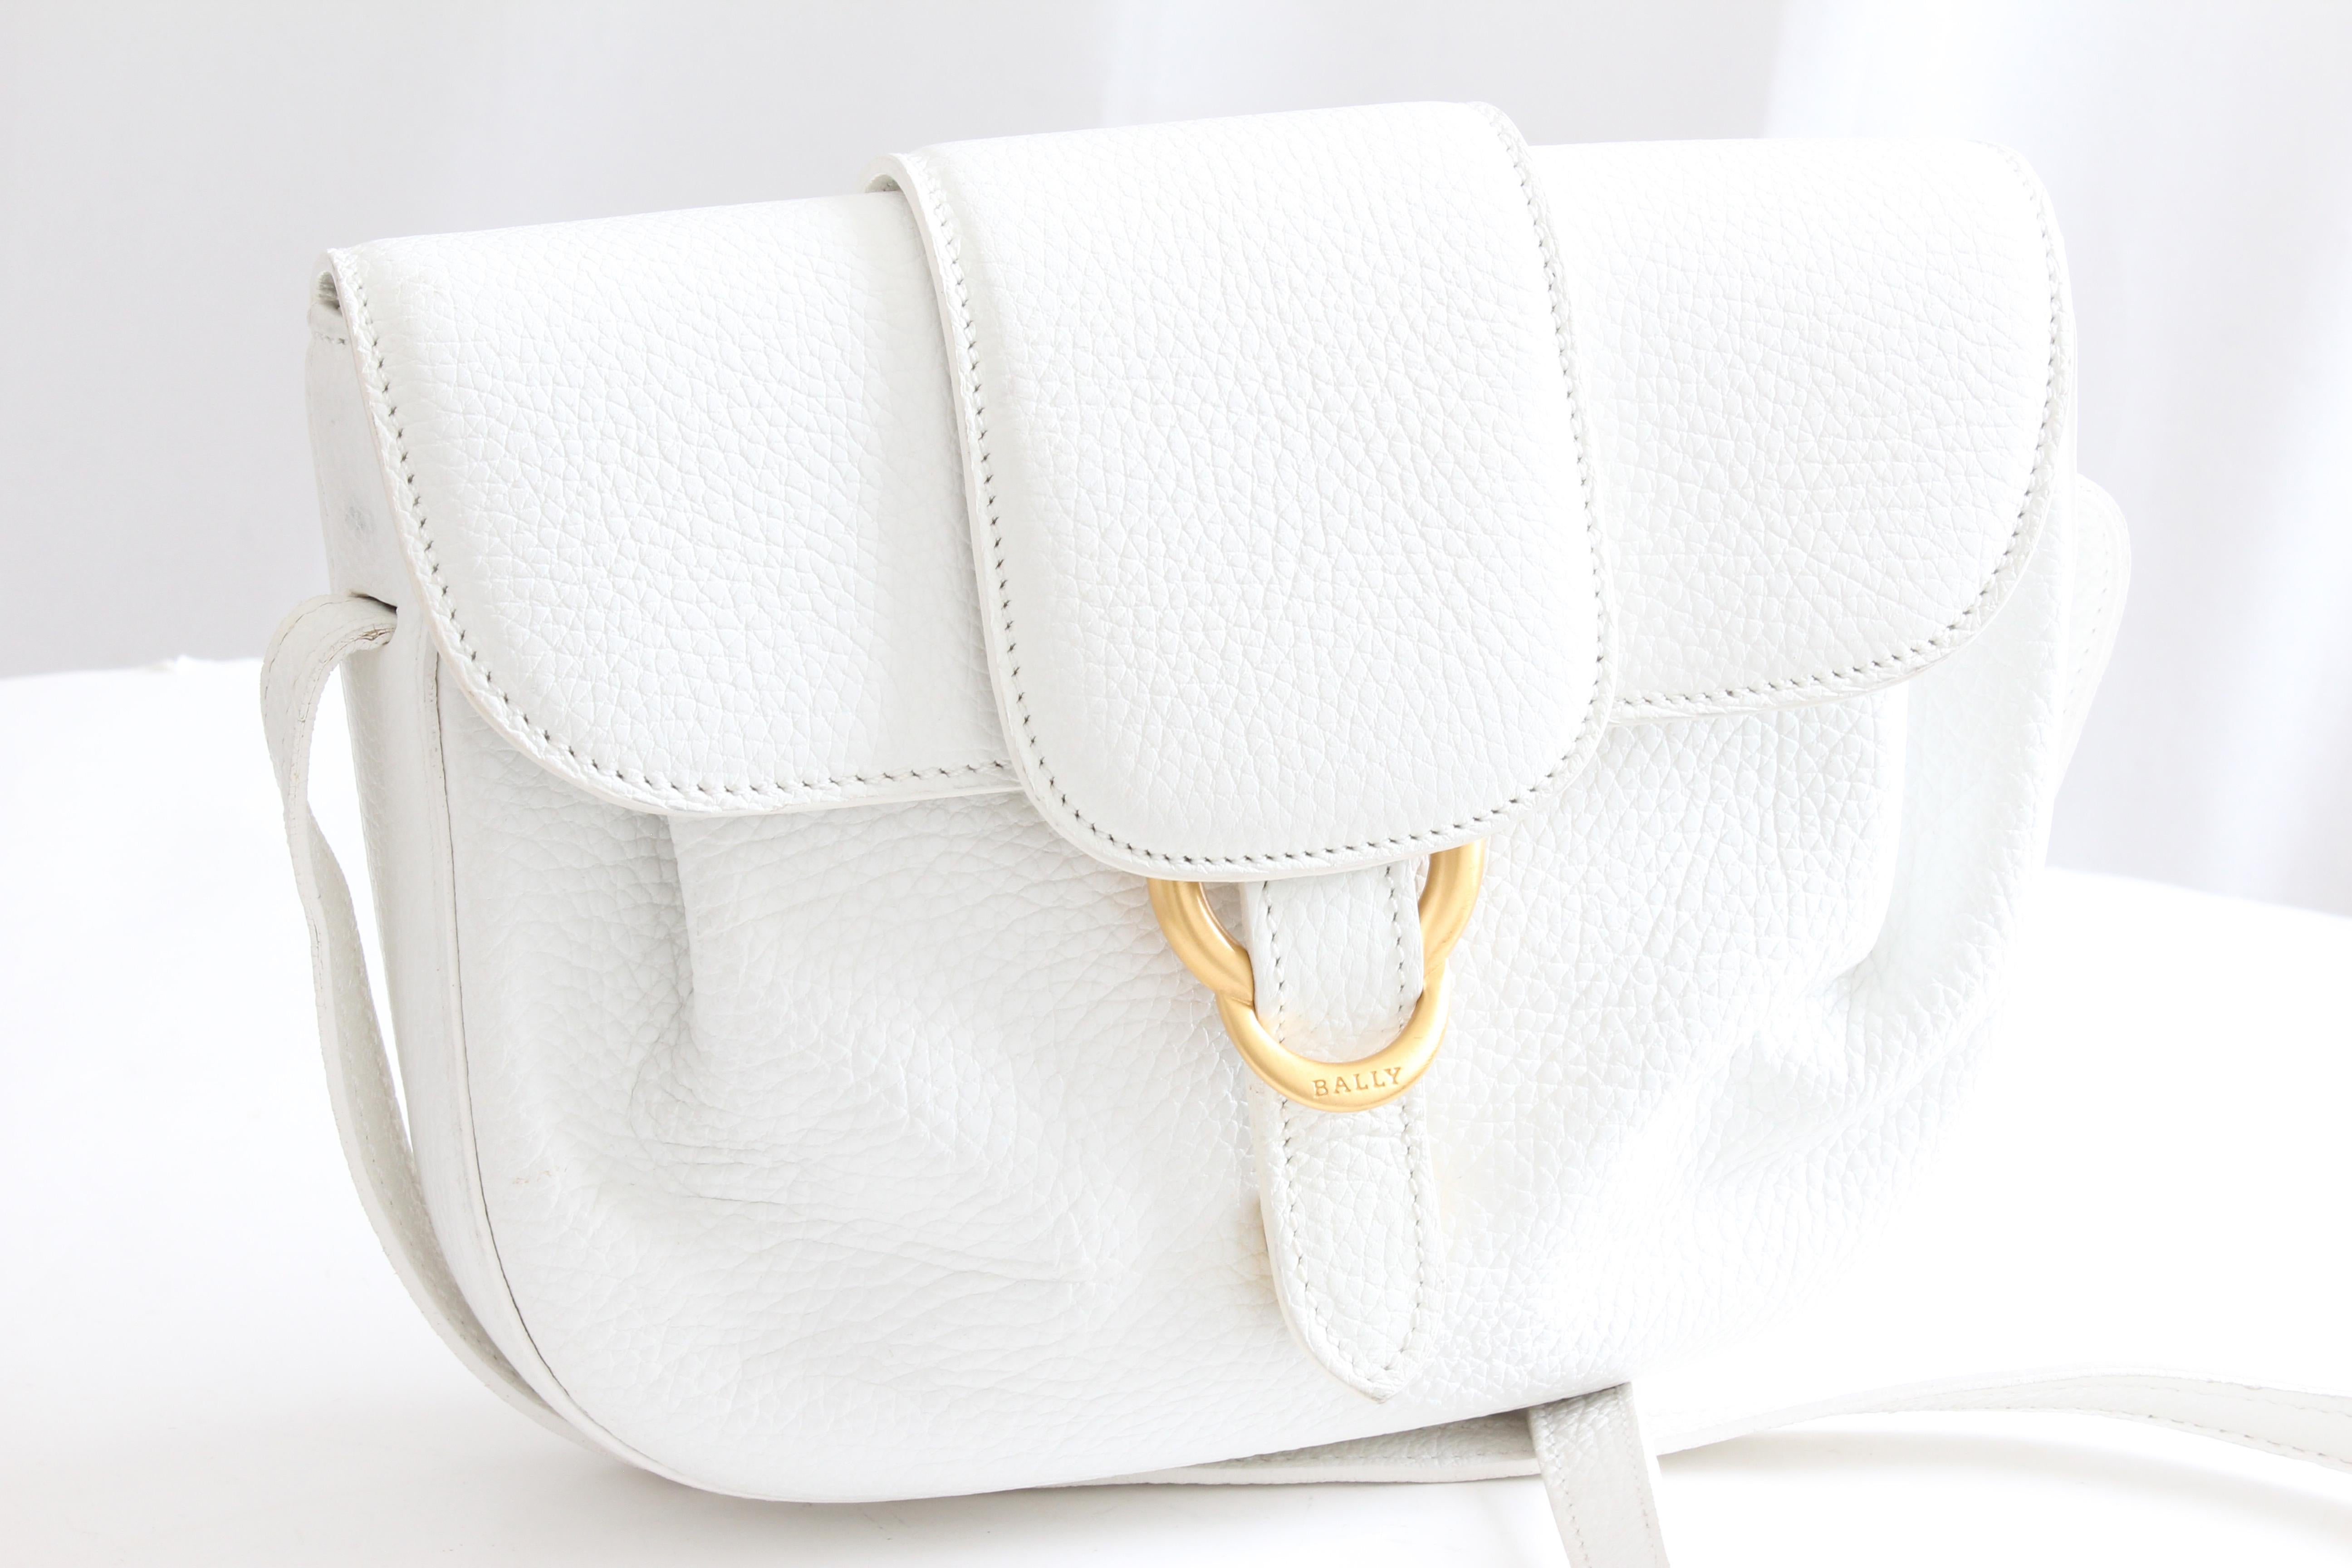 This chic little bag was made by Bally, likely in the early 2000s.  Made from white pebbled leather, it features an adjustable strap, allowing one to wear crossbody or on shoulder.  The interior features two compartments and one zipper pocket.  

A